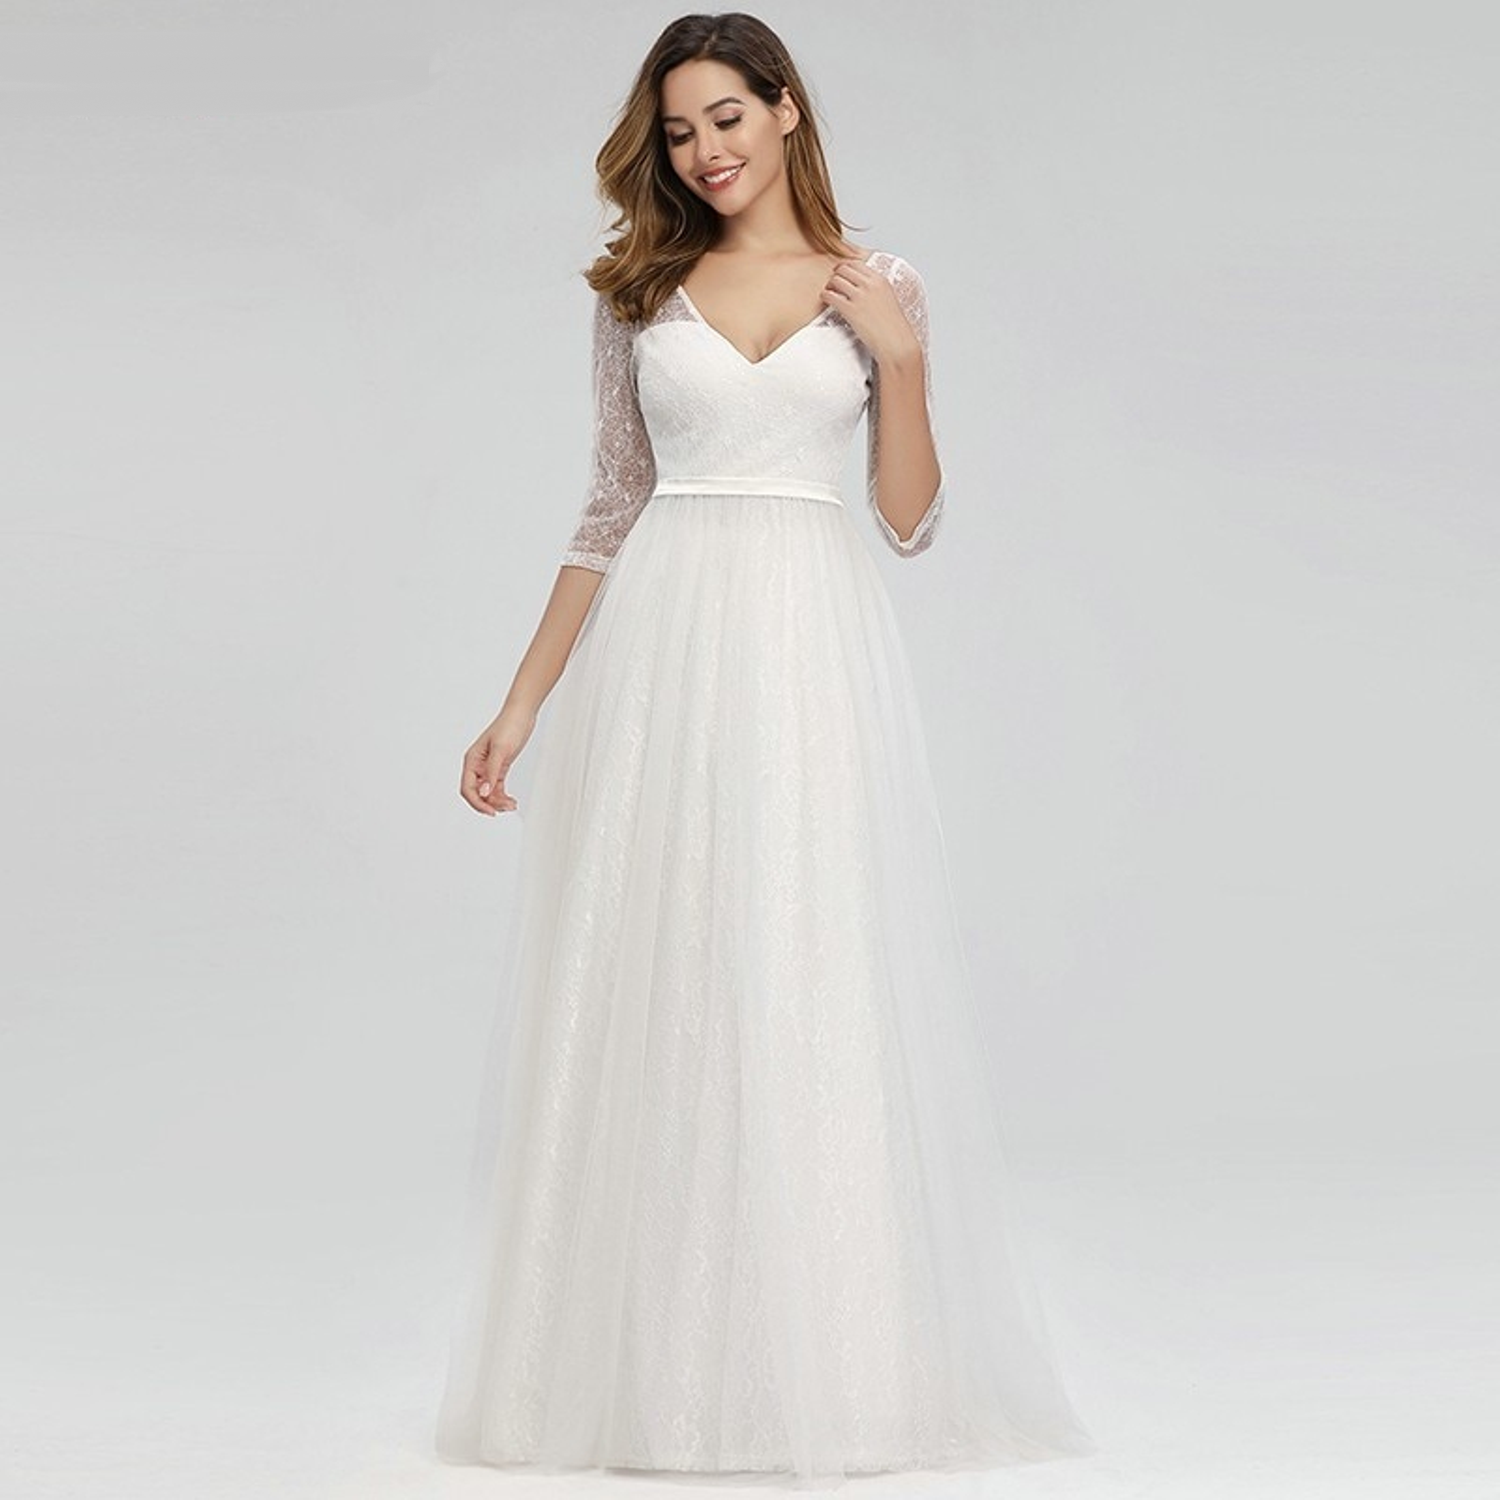 Is It Possible to Get Beautiful Wedding Dresses Cheap